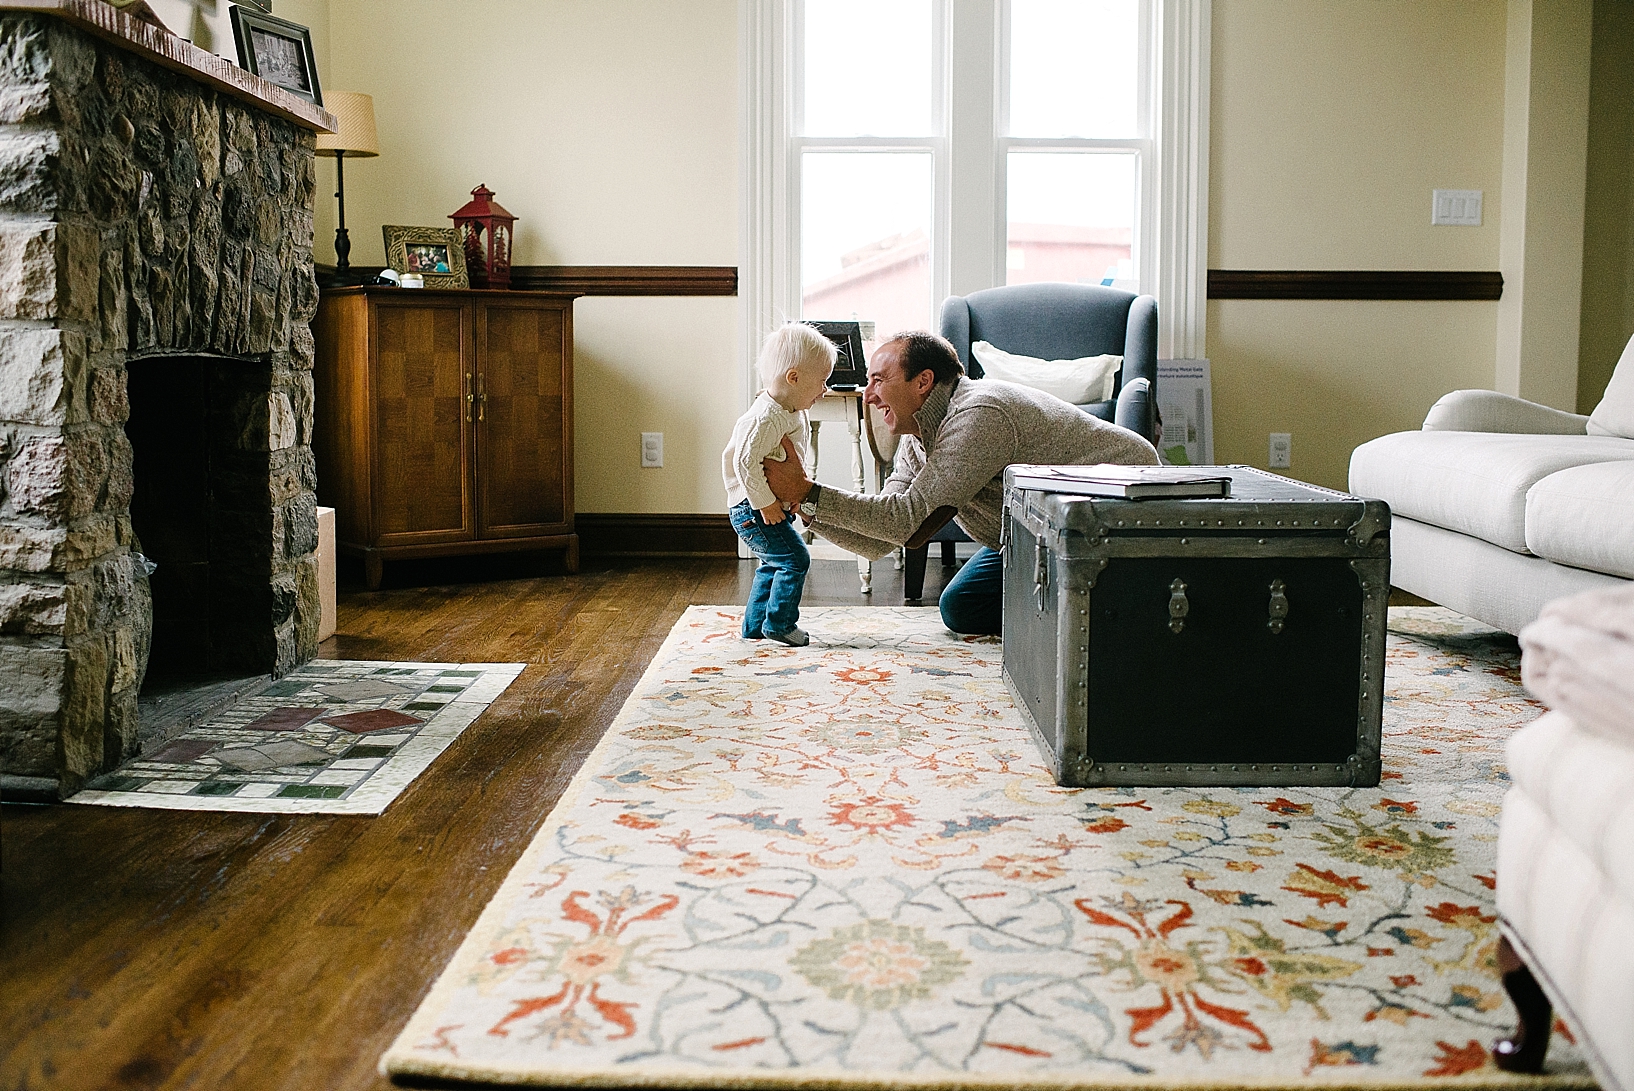 dad sitting on living room floor with toddler son